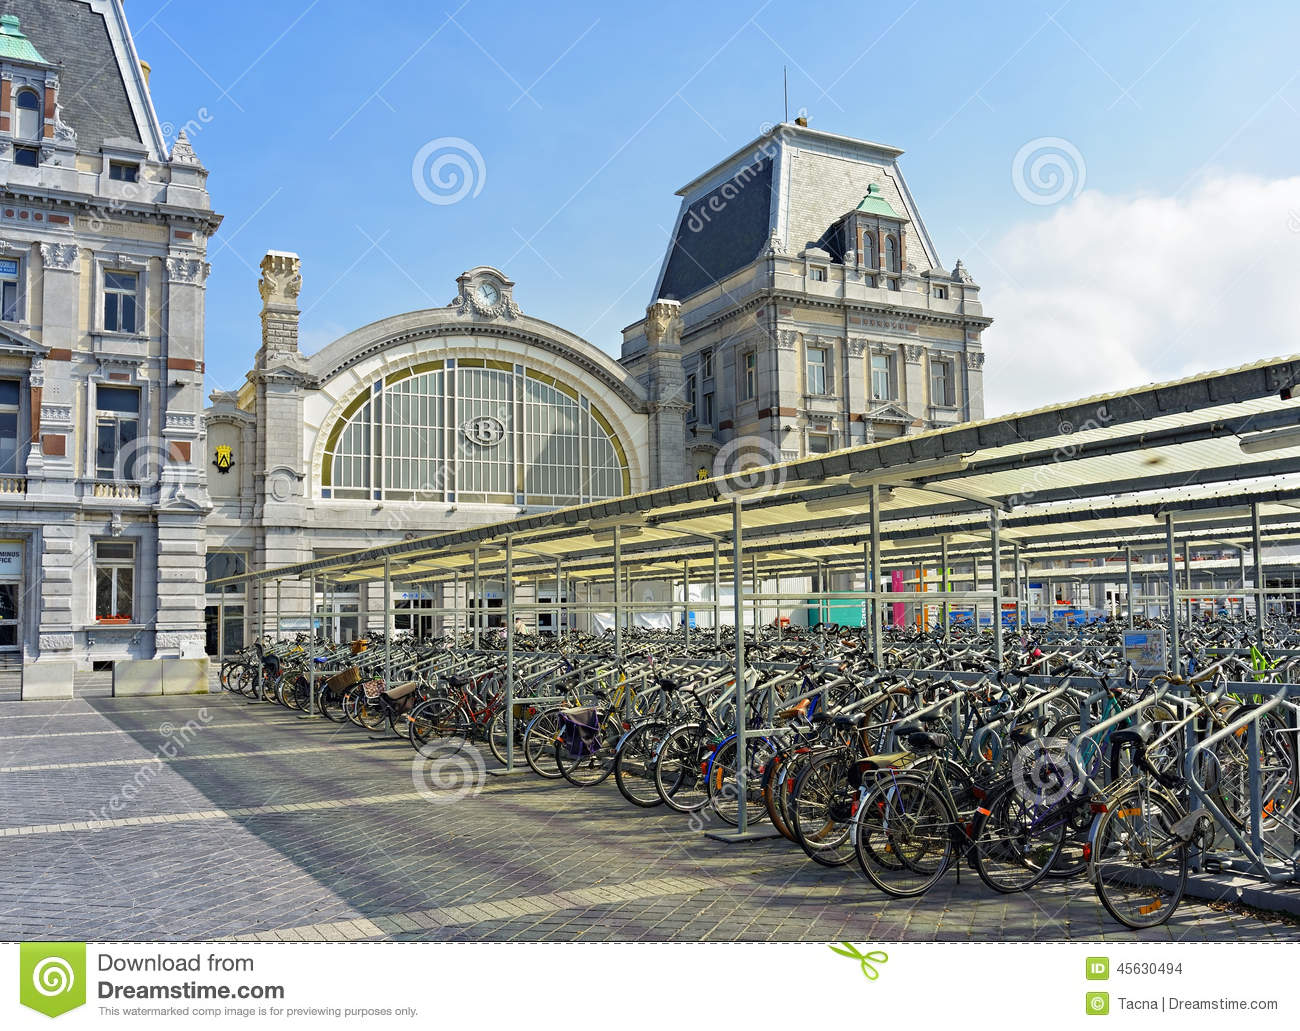 bicycles-front-central-railway-station-ostend-belgium-september-was-built-currently-under-45630494